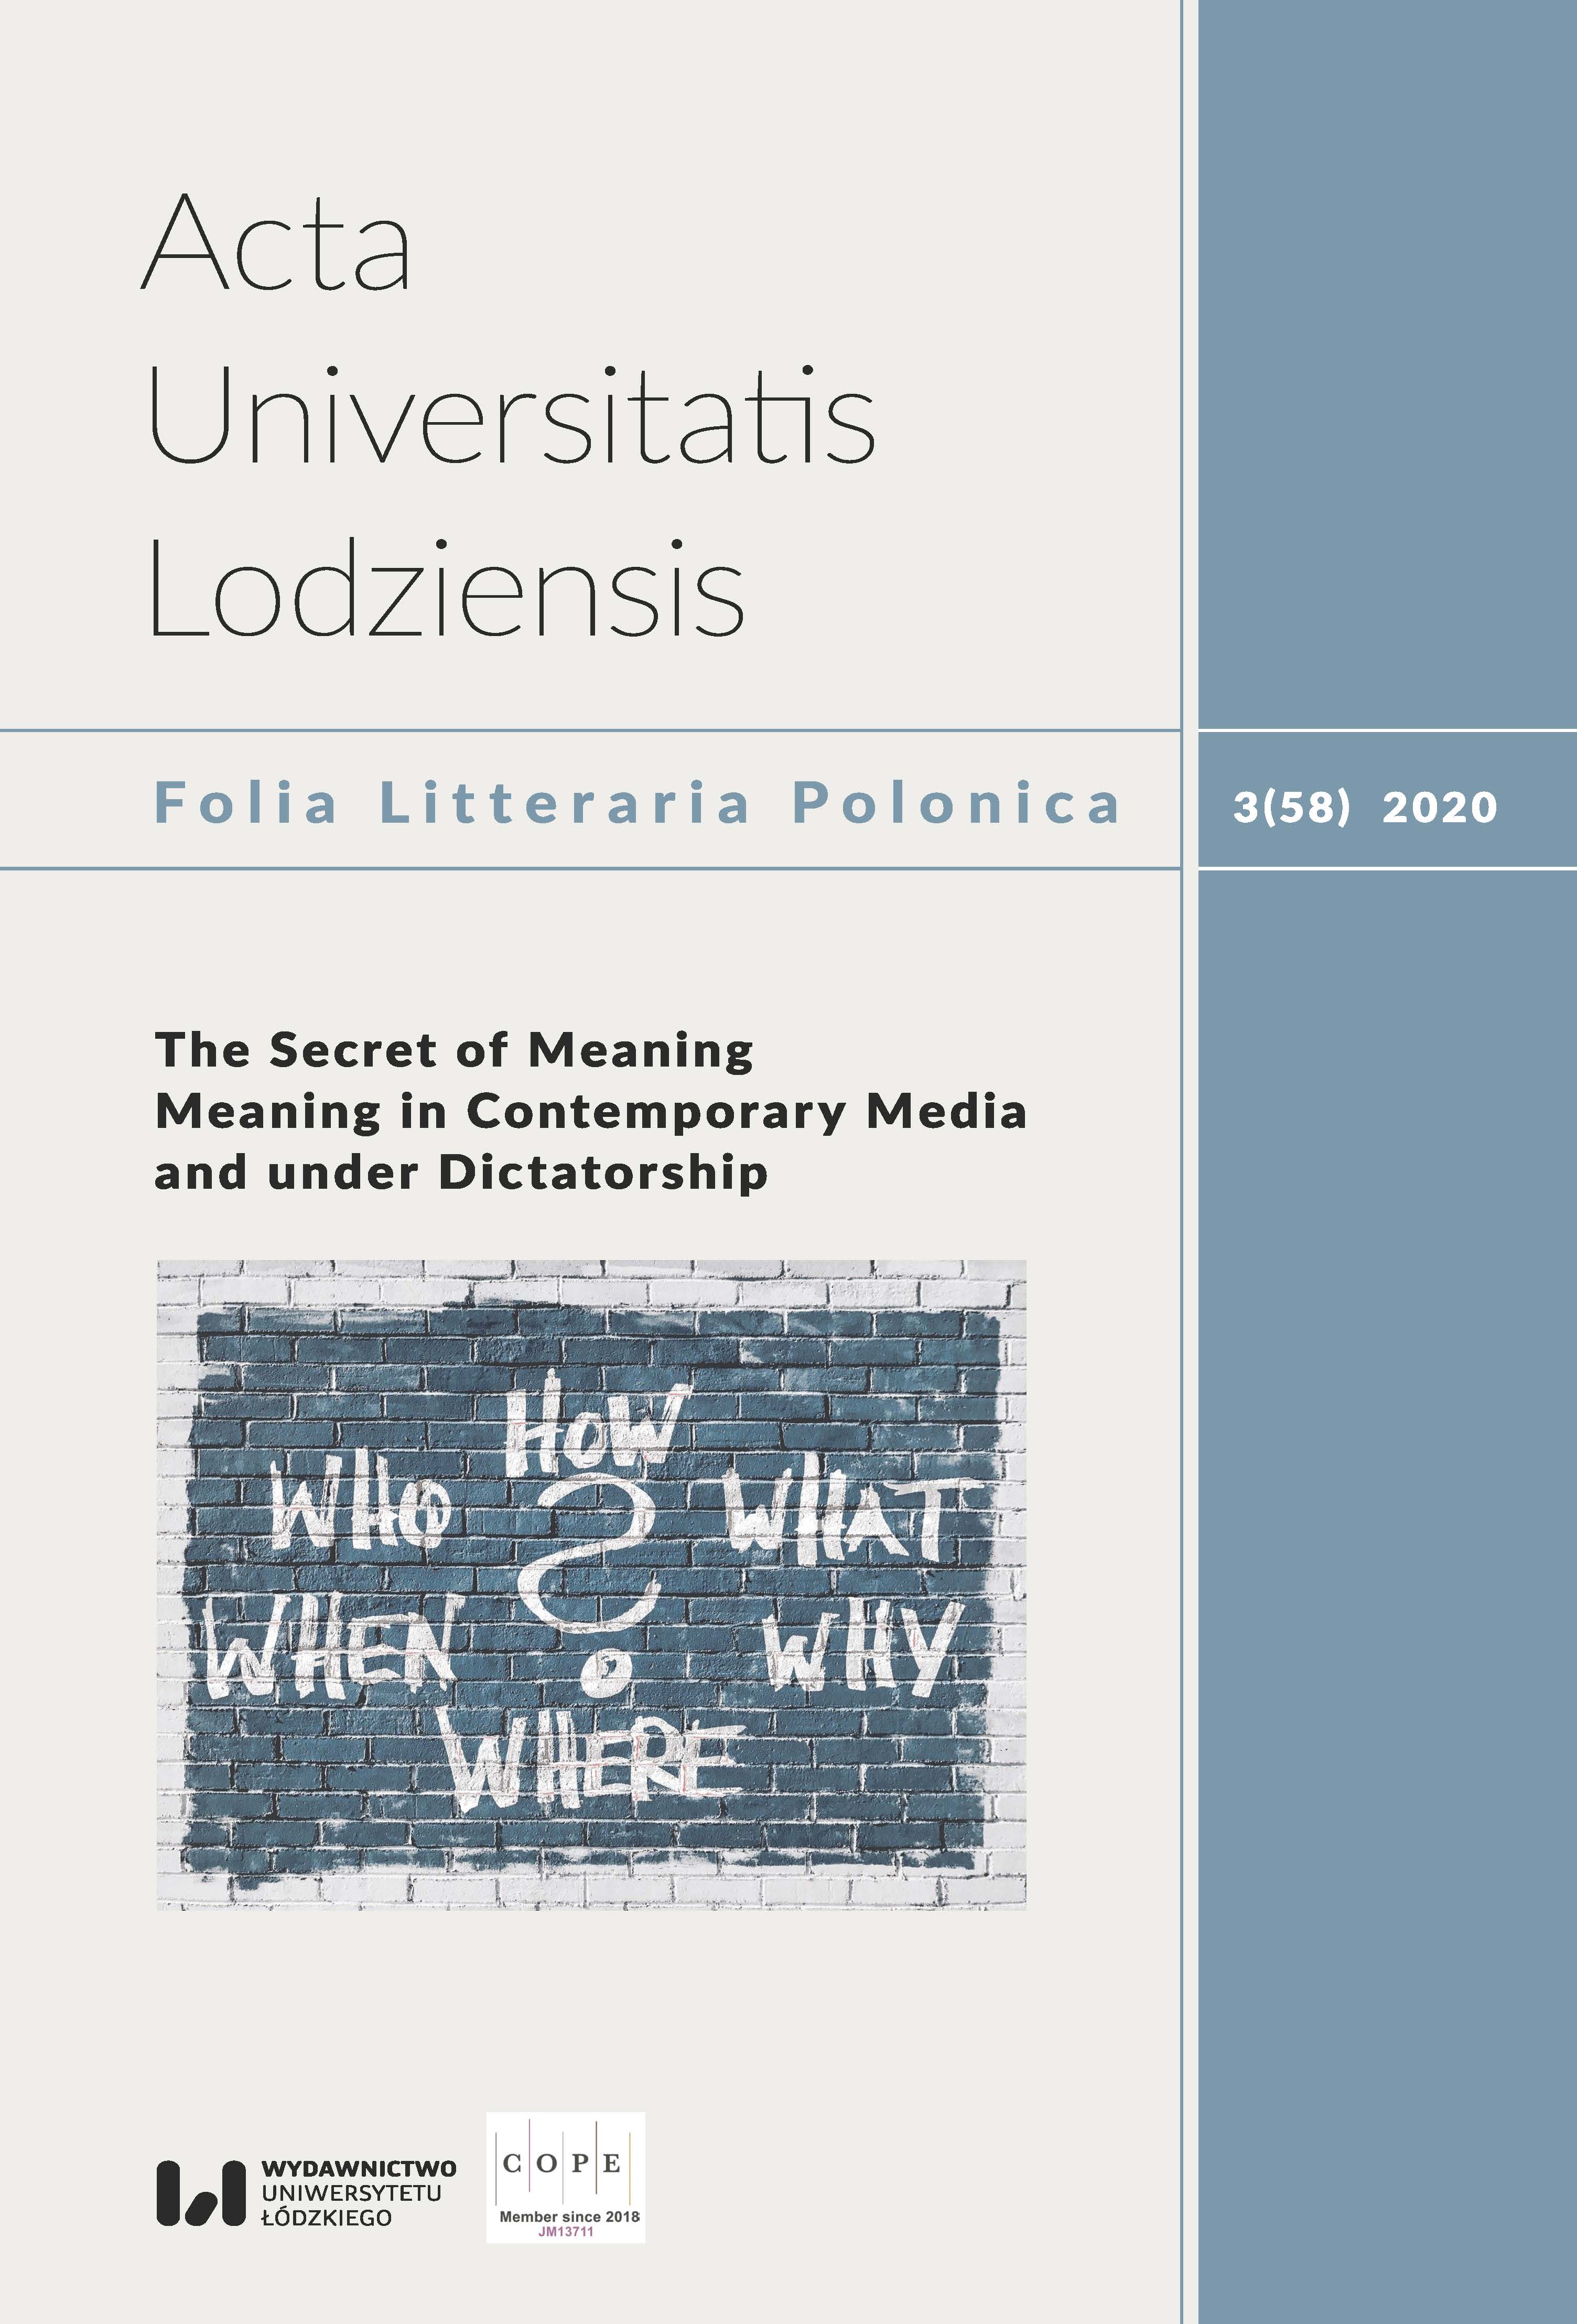 Contemporary communication and ratiomorphization of meaning